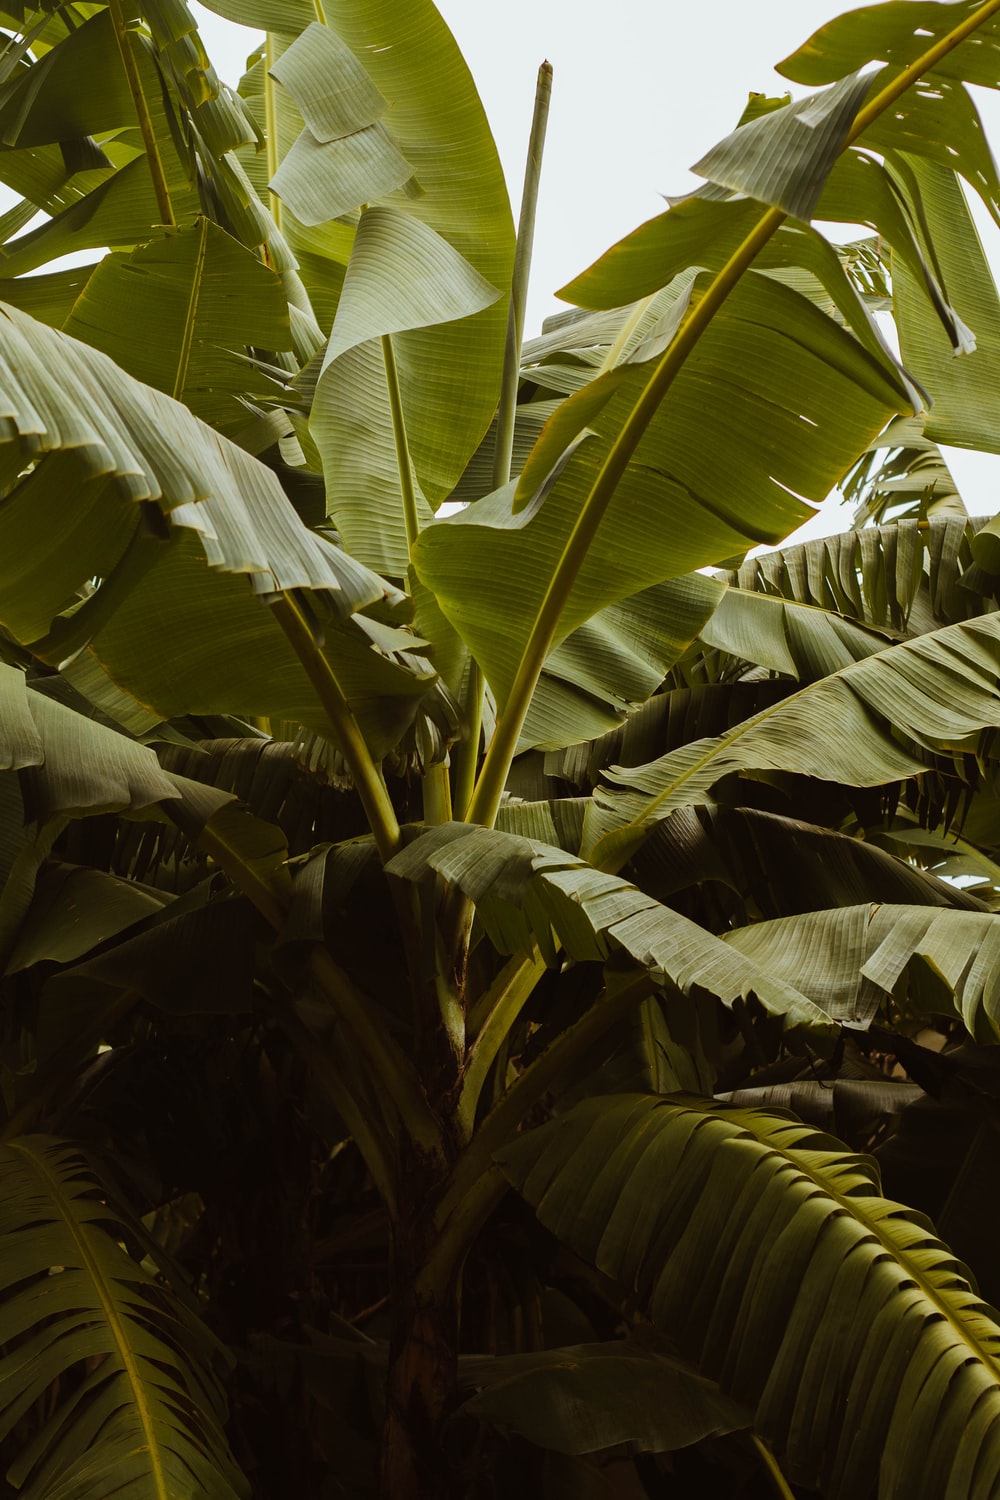 Banana Leaves Picture. Download Free Image